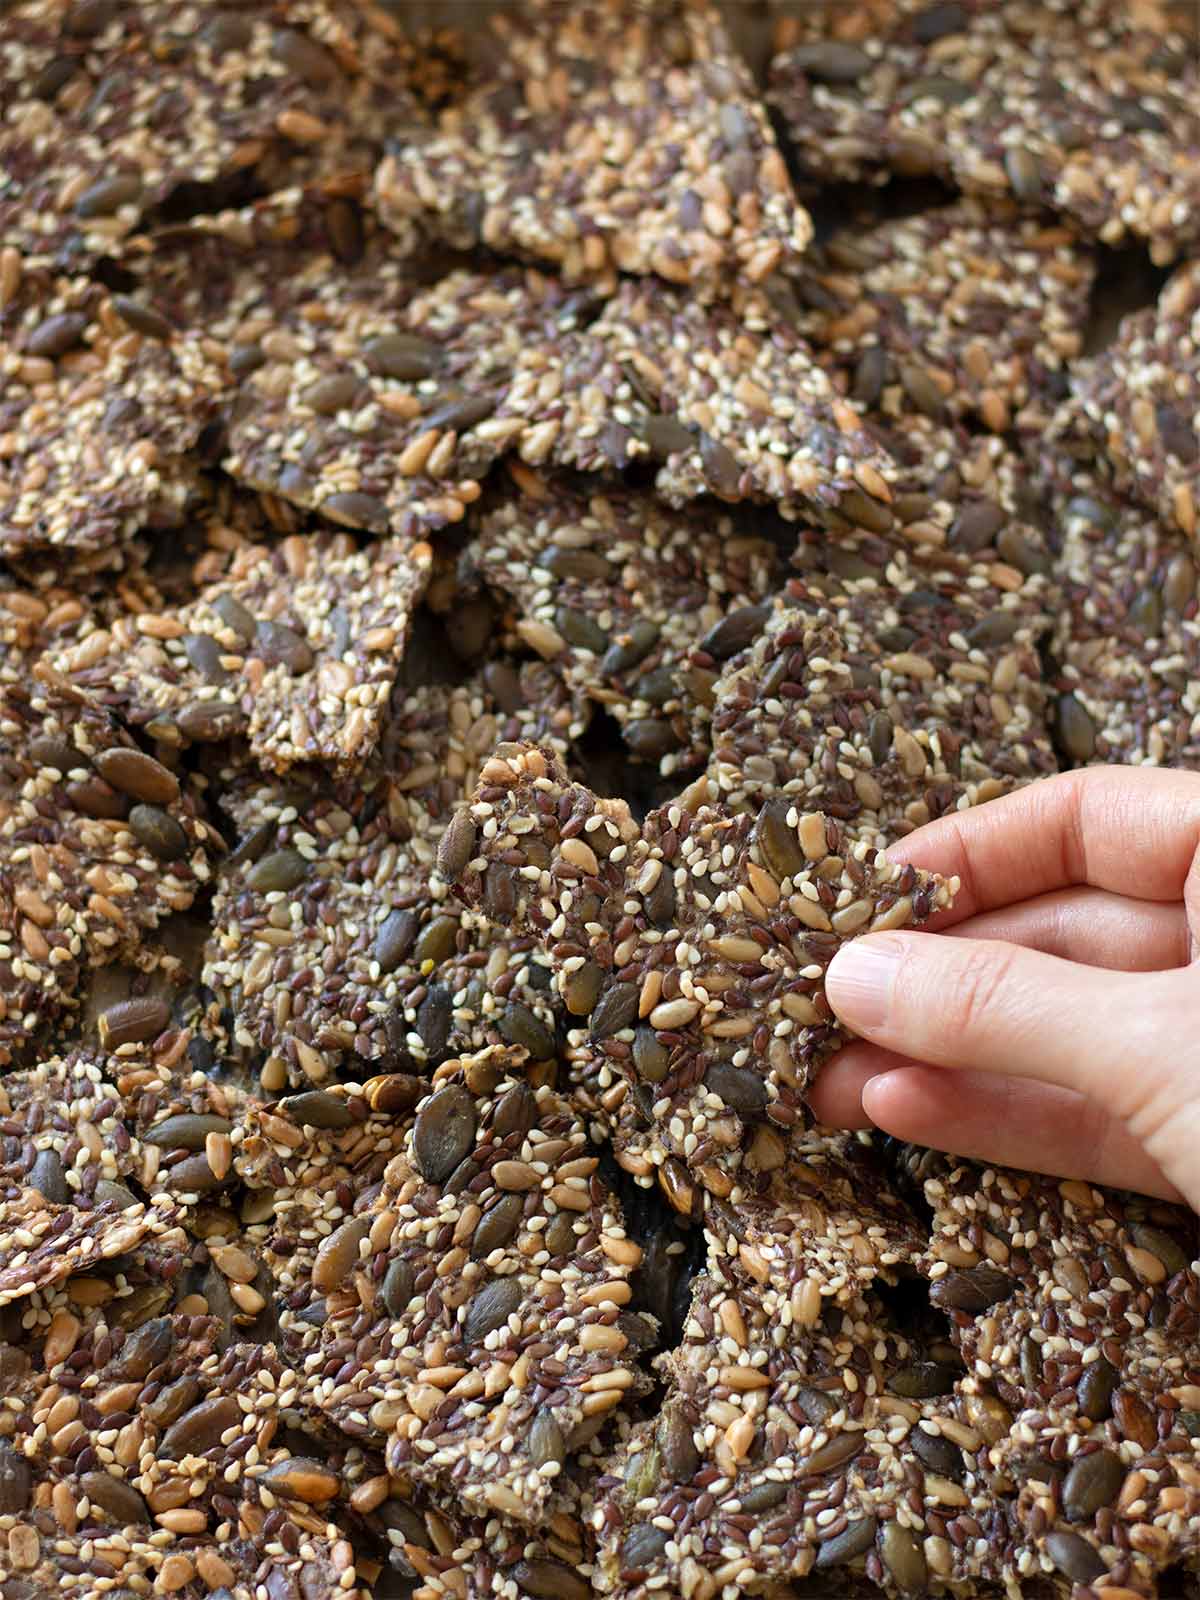 Hand is holding healthy vegan and keto homemade savory cracker over a baking sheet full of crunchy freshly baked crackers